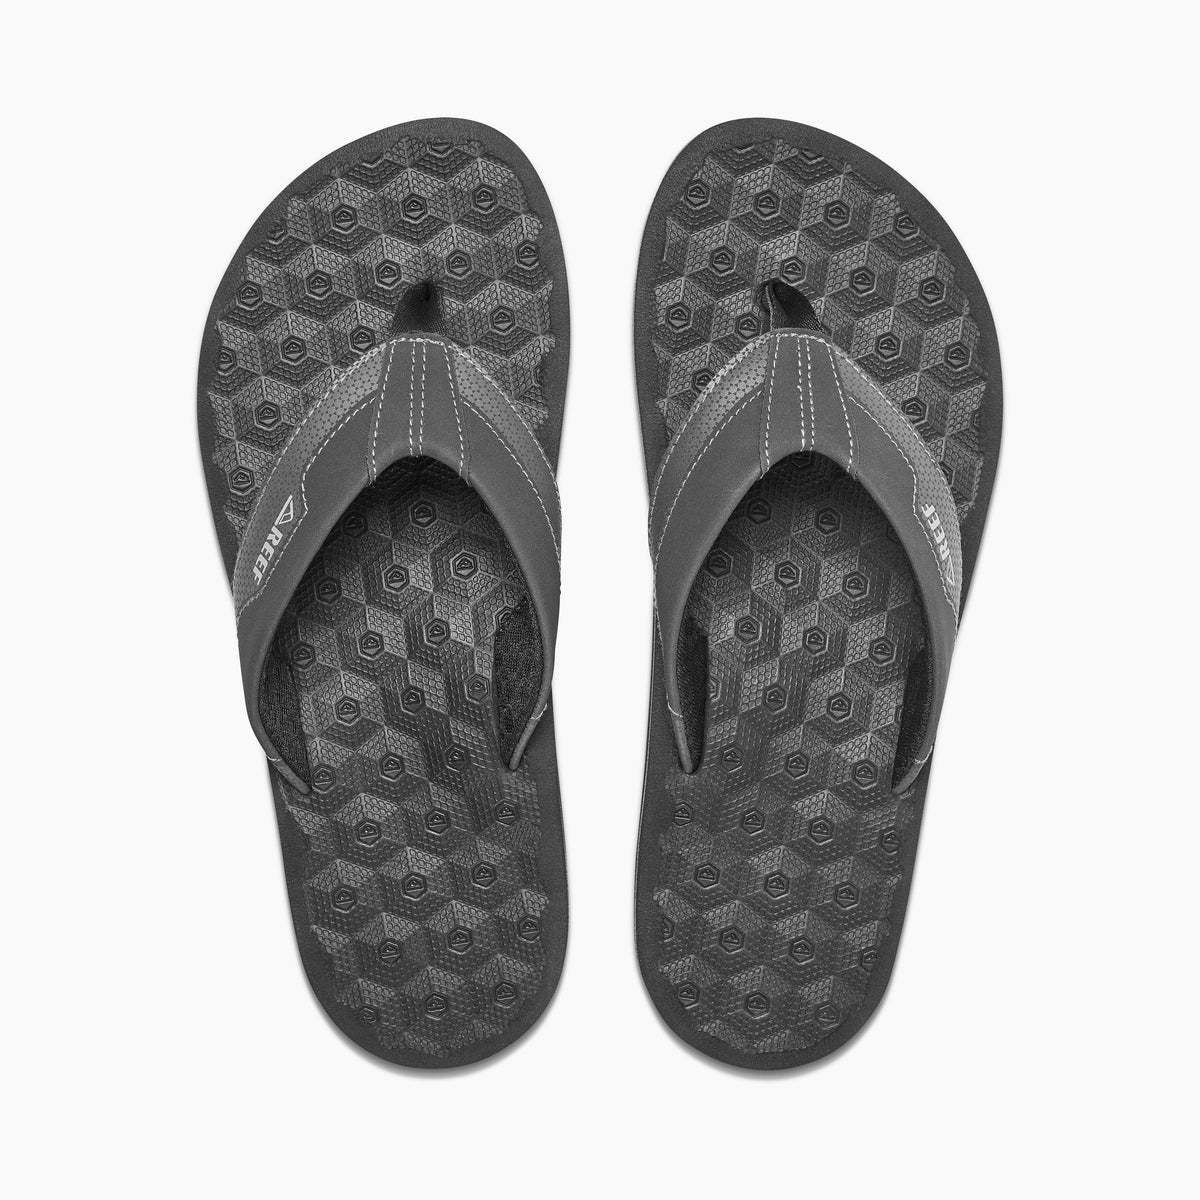 Reef Mens Sandals | The Ripper